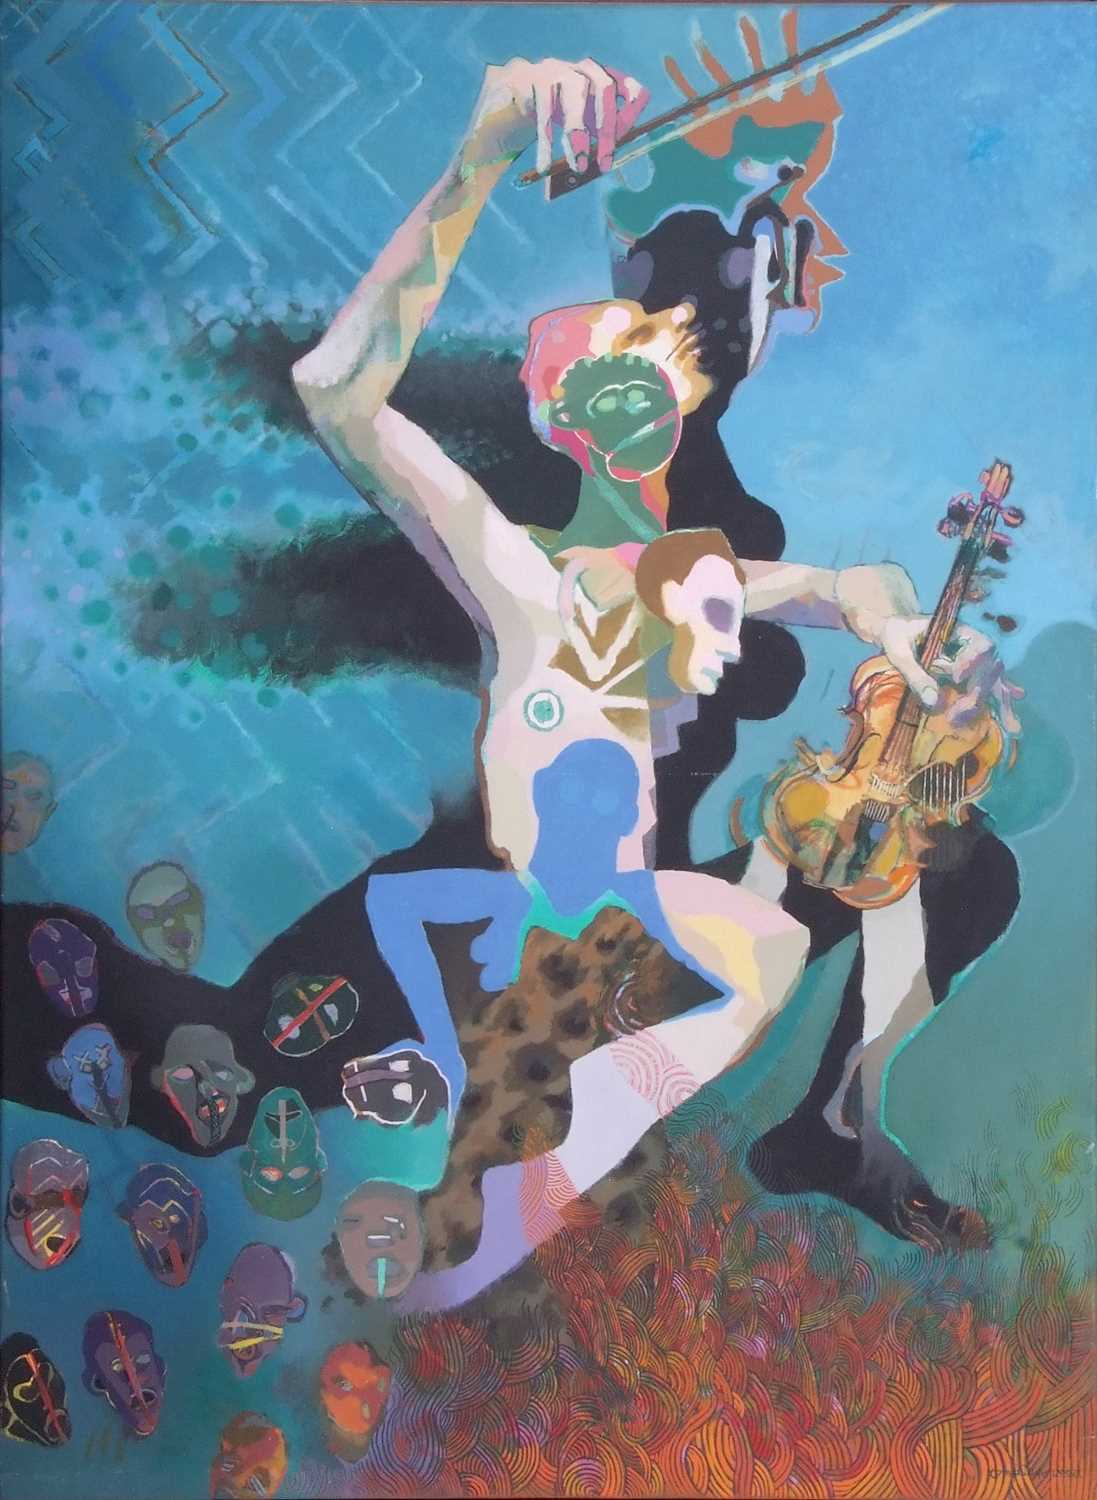 Tom Phillips (British b. 1937) "Orpheus" oil on canvas, signed. Provenance: Exhibited John Moores - Image 2 of 3